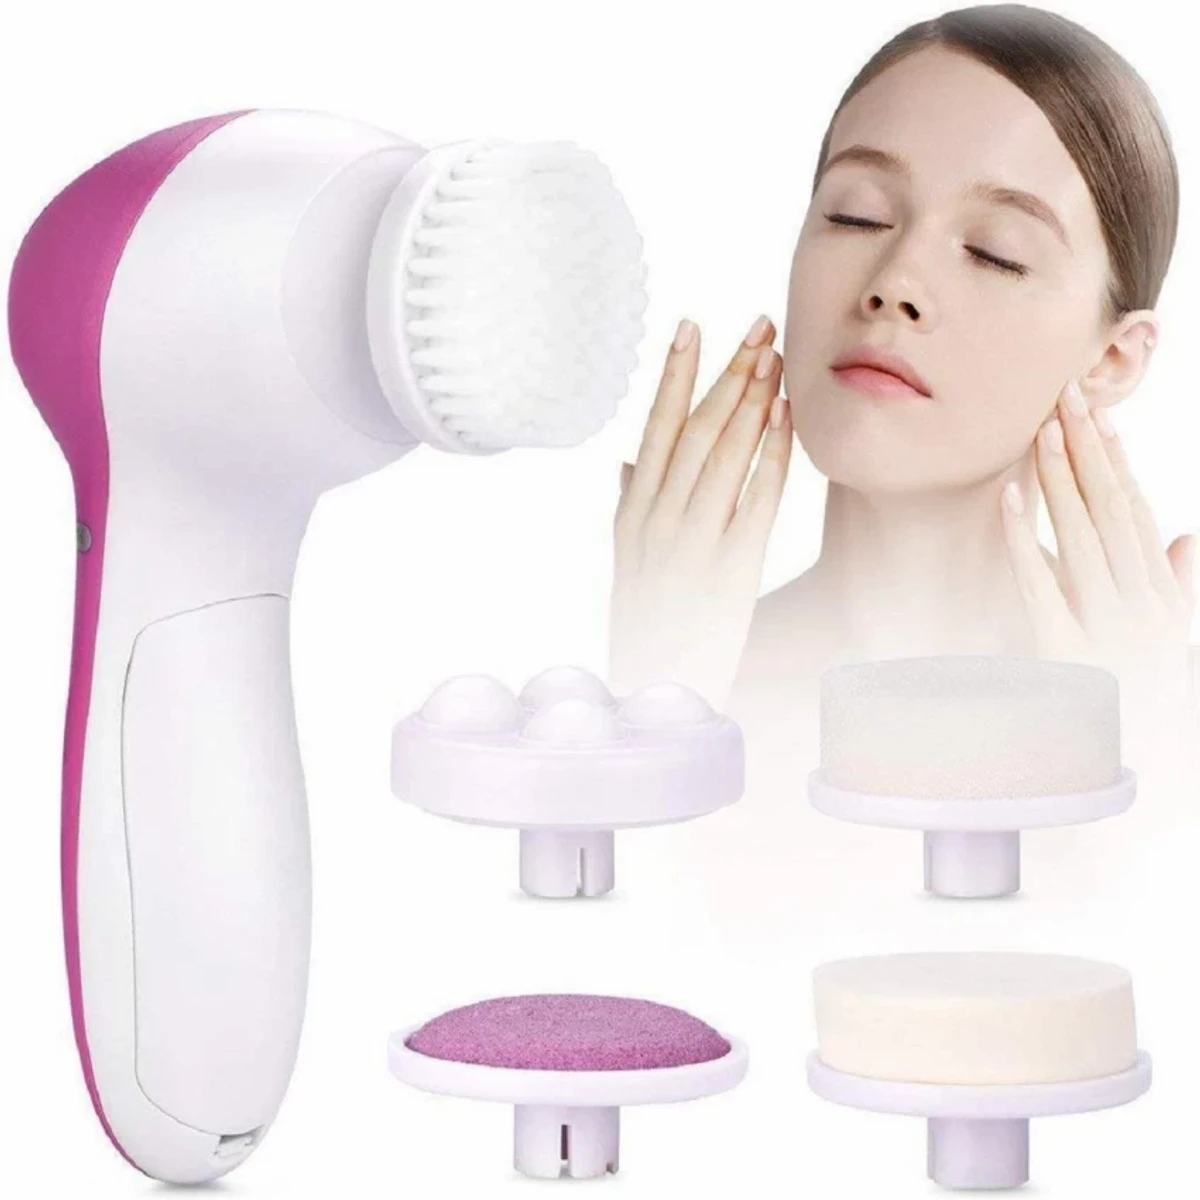 Styler 5 In 1 Beauty Care Face Massager